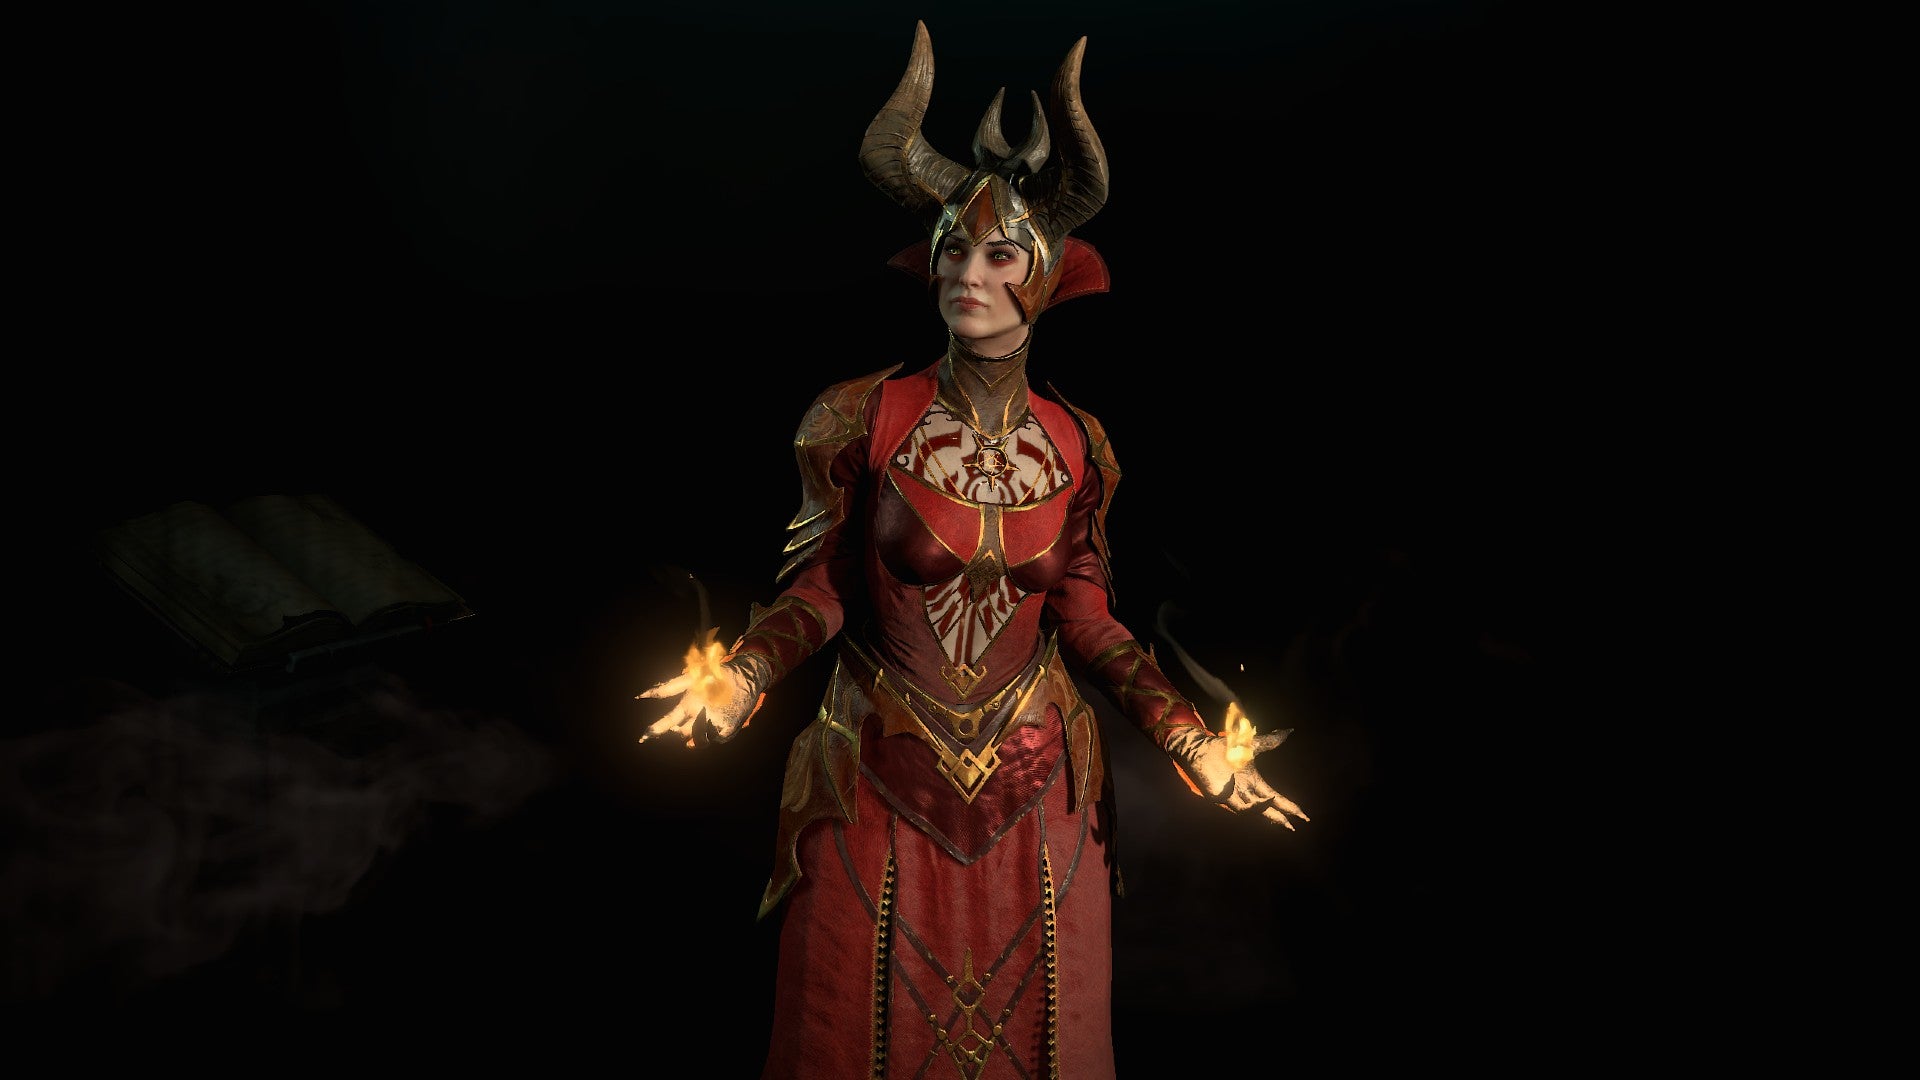 Diablo 4 image showing a Sorcerer wearing red robes and with fire in their hands, set against a dark background.